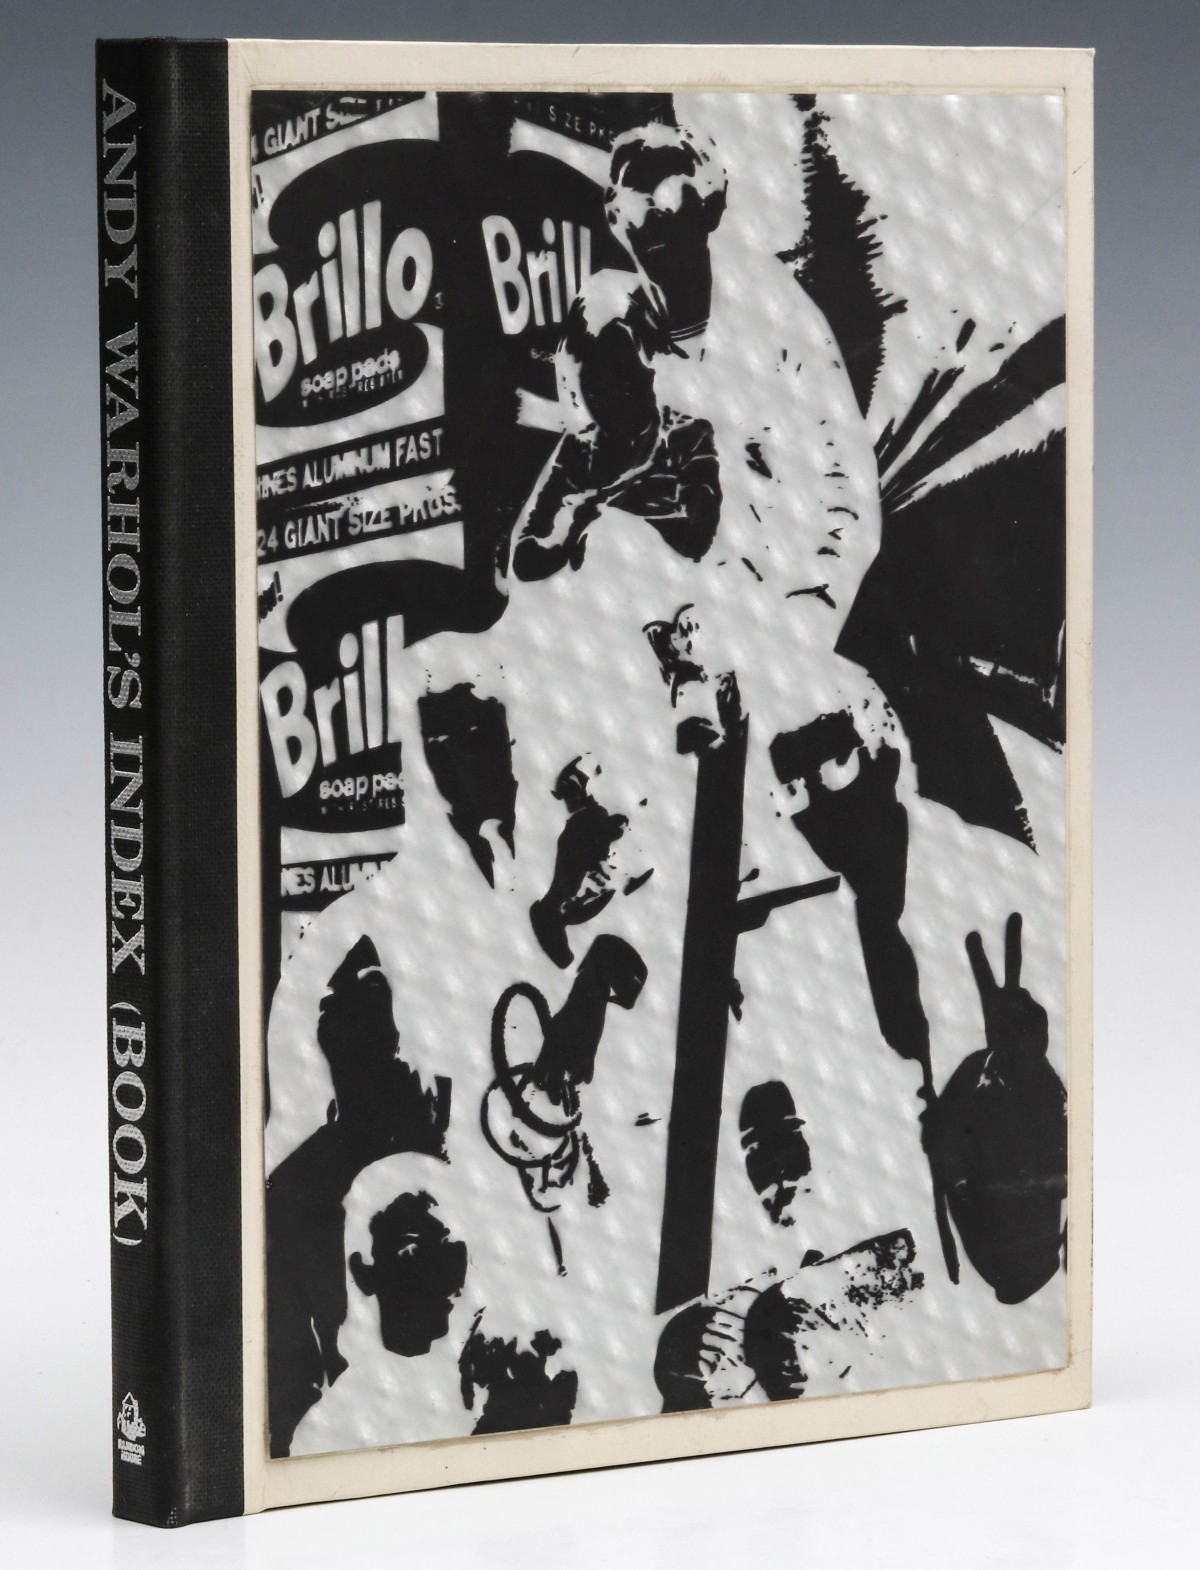 INDEX BY ANDY WARHOL, FIRST EDITION, 1967